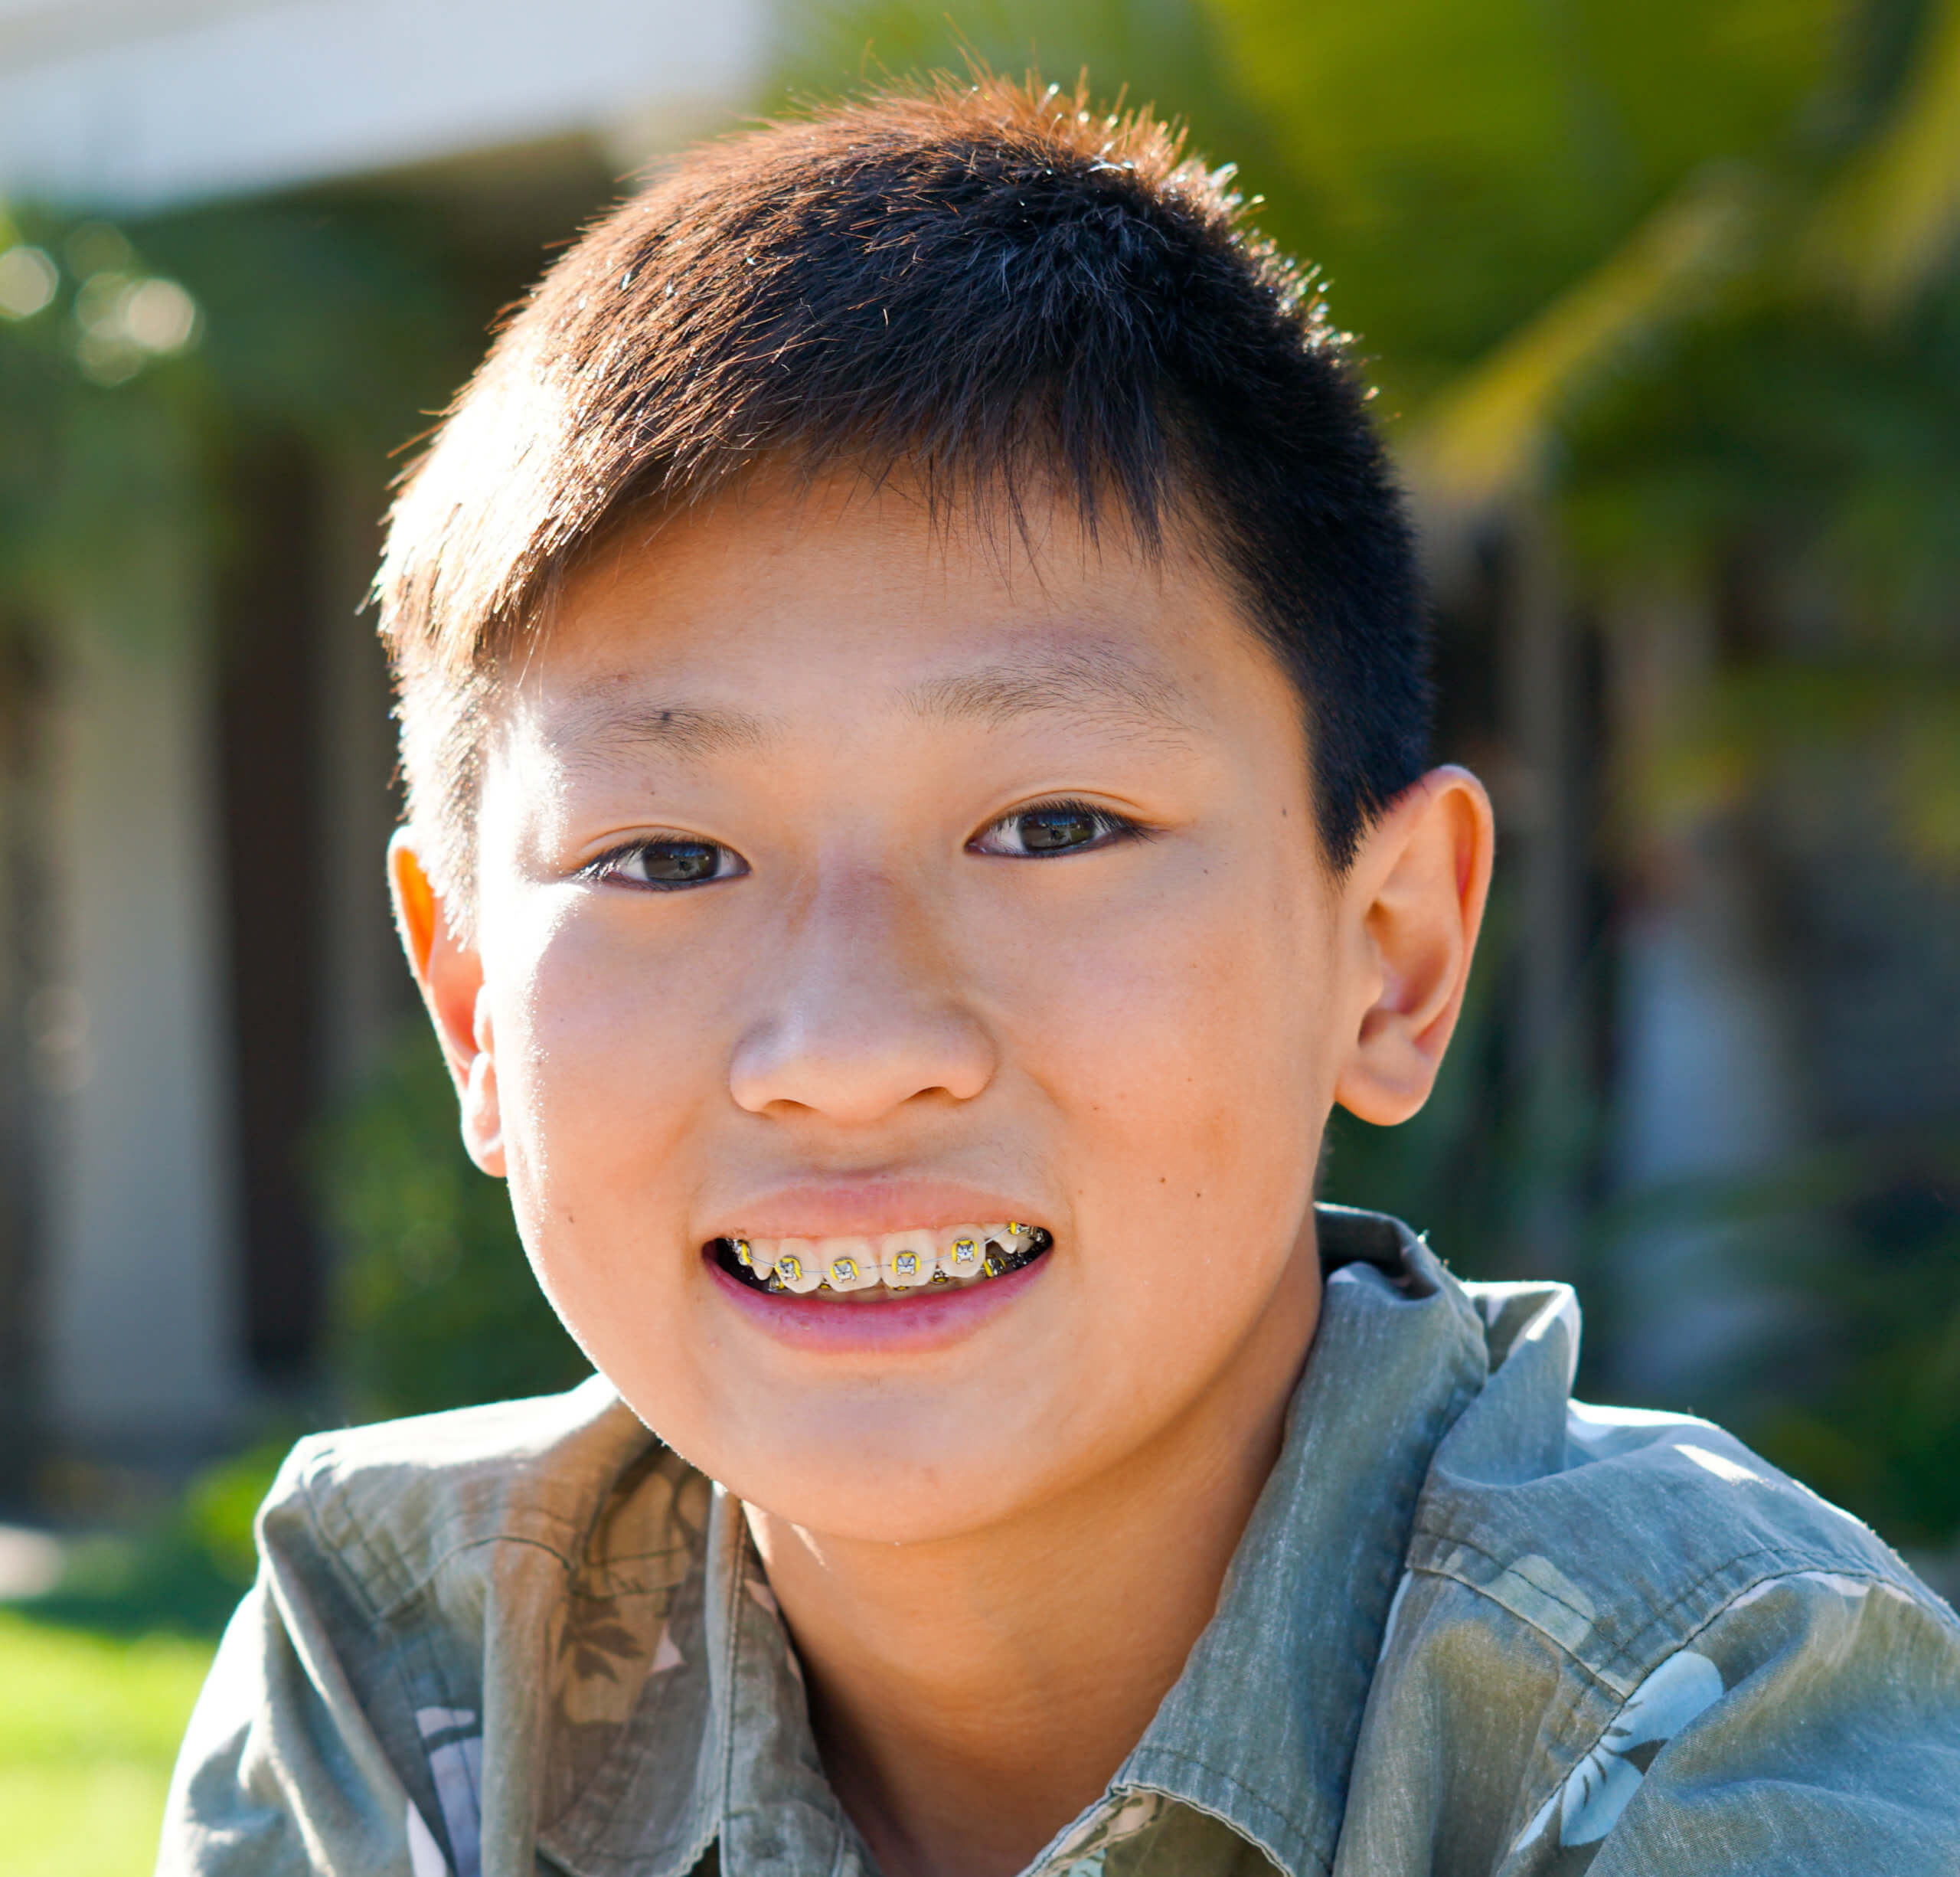 Portrait of young kid Asian boy with tooth braces. Young teen boy smiling and showing his orthodontic braces on his teeth.